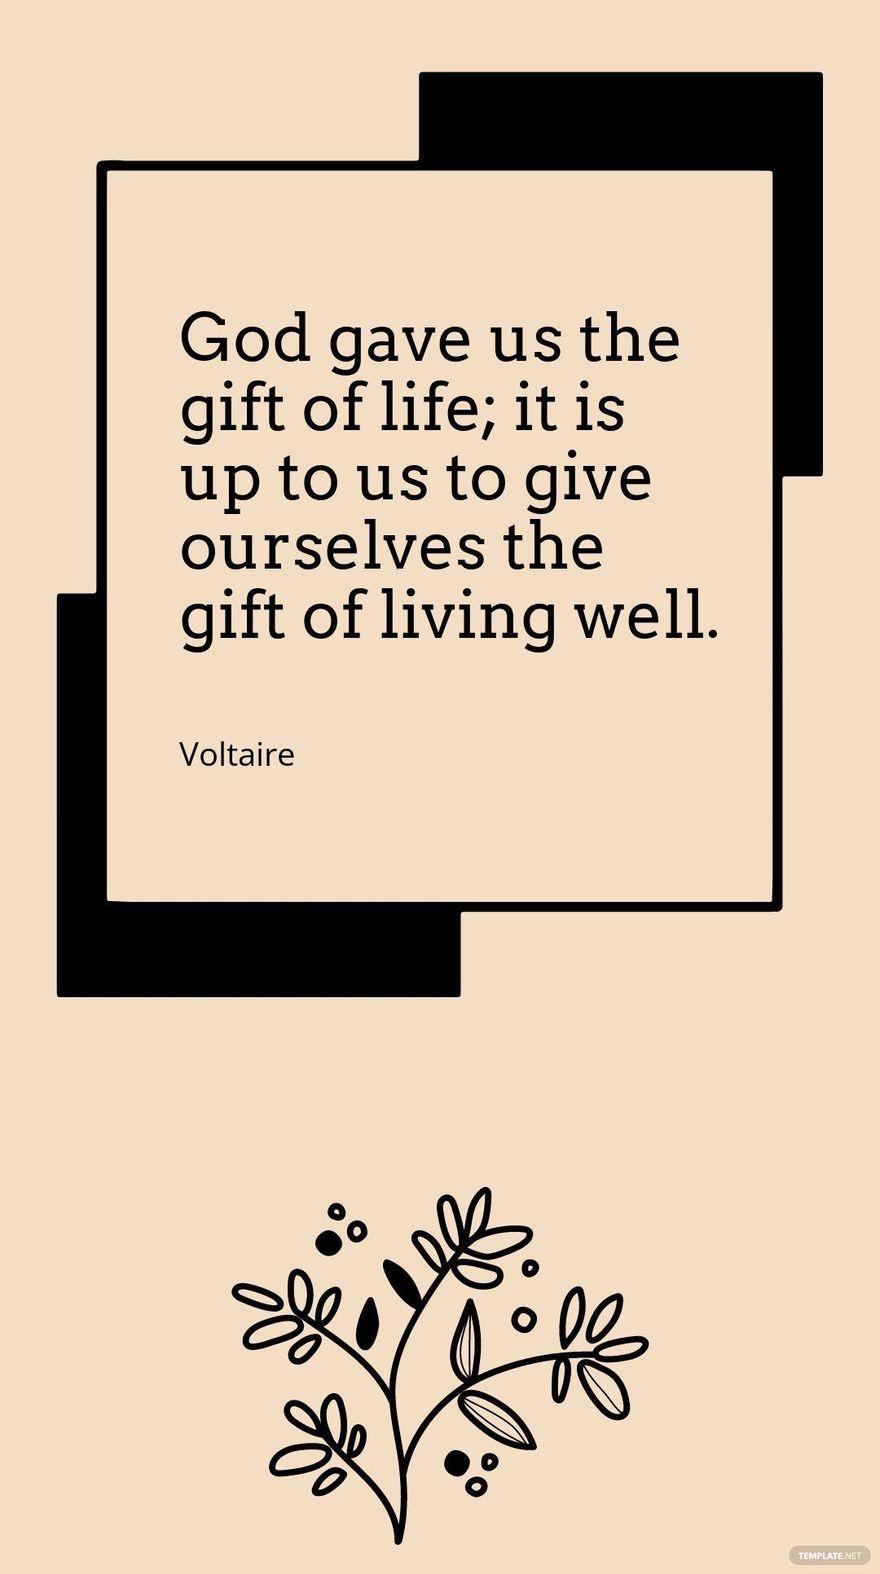 Voltaire - God gave us the gift of life; it is up to us to give ourselves the gift of living well.